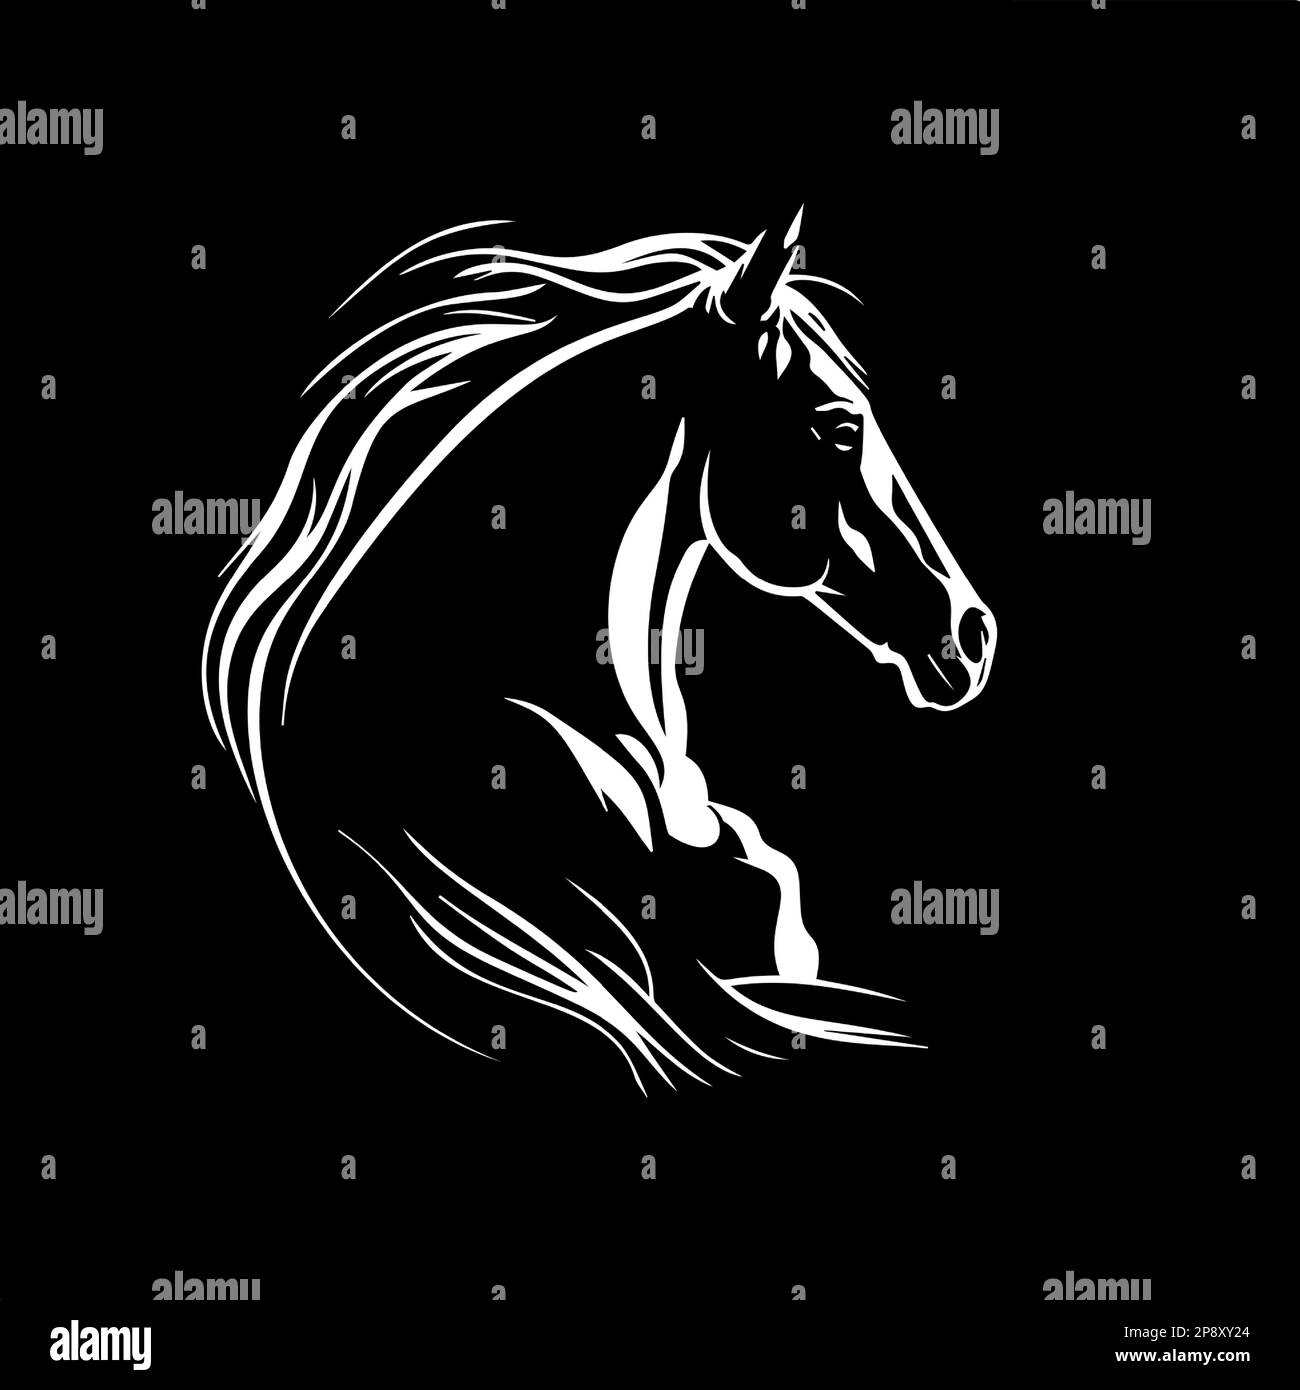 Minimalistic logo template, white icon of horse silhouette on black background, modern logotype concept for business identity, t-shirts print, tattoo Stock Vector